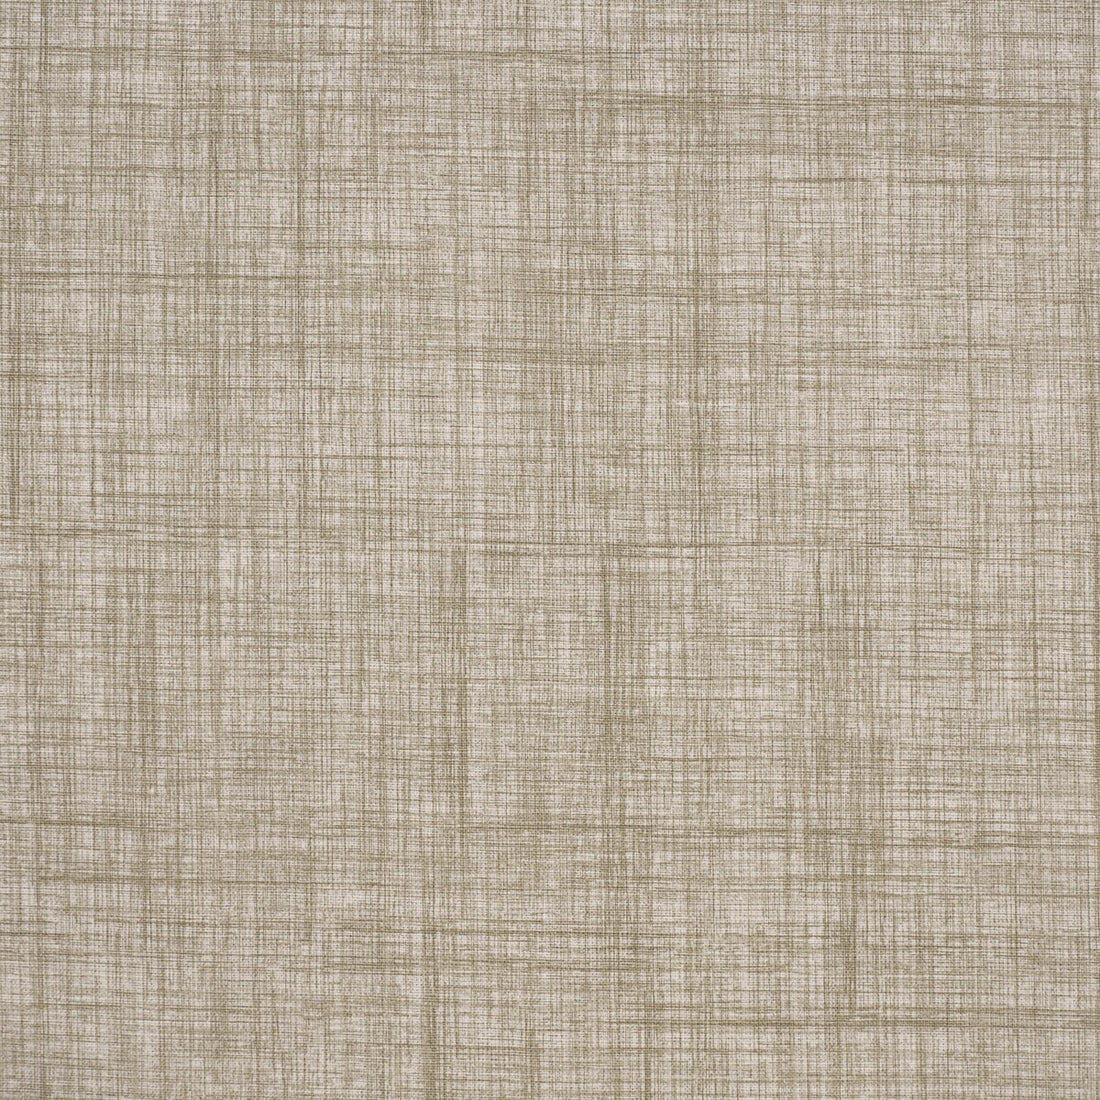 Hampton fabric in stone color - pattern BFC-3667.106.0 - by Lee Jofa in the Blithfield collection